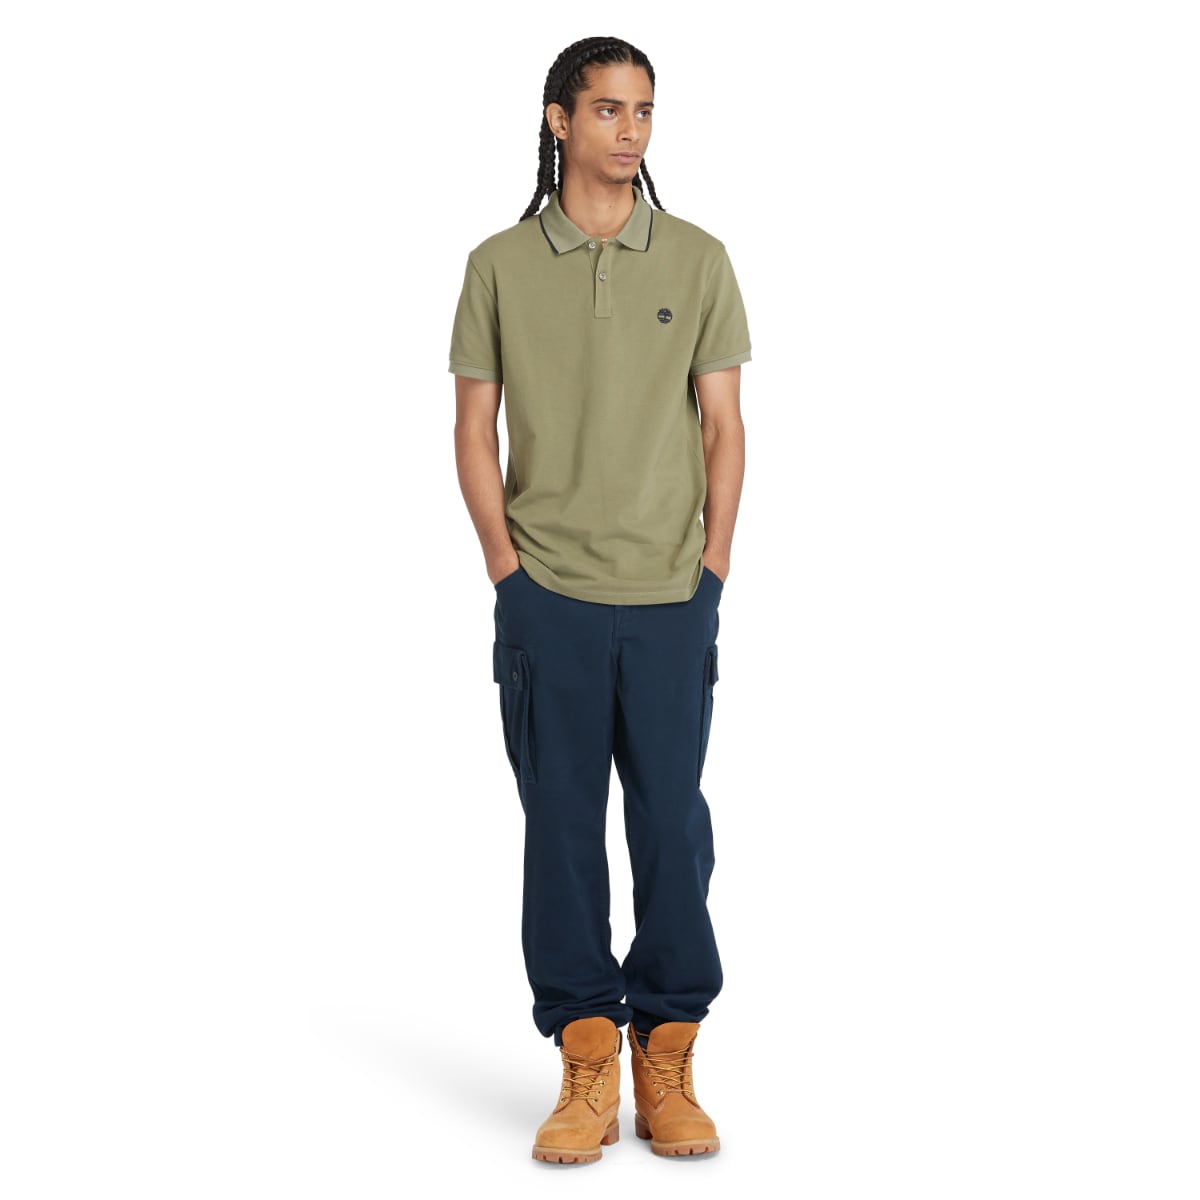 Timberland Millers River Piquet Men's Polo | Olive (Navy collar stripe)